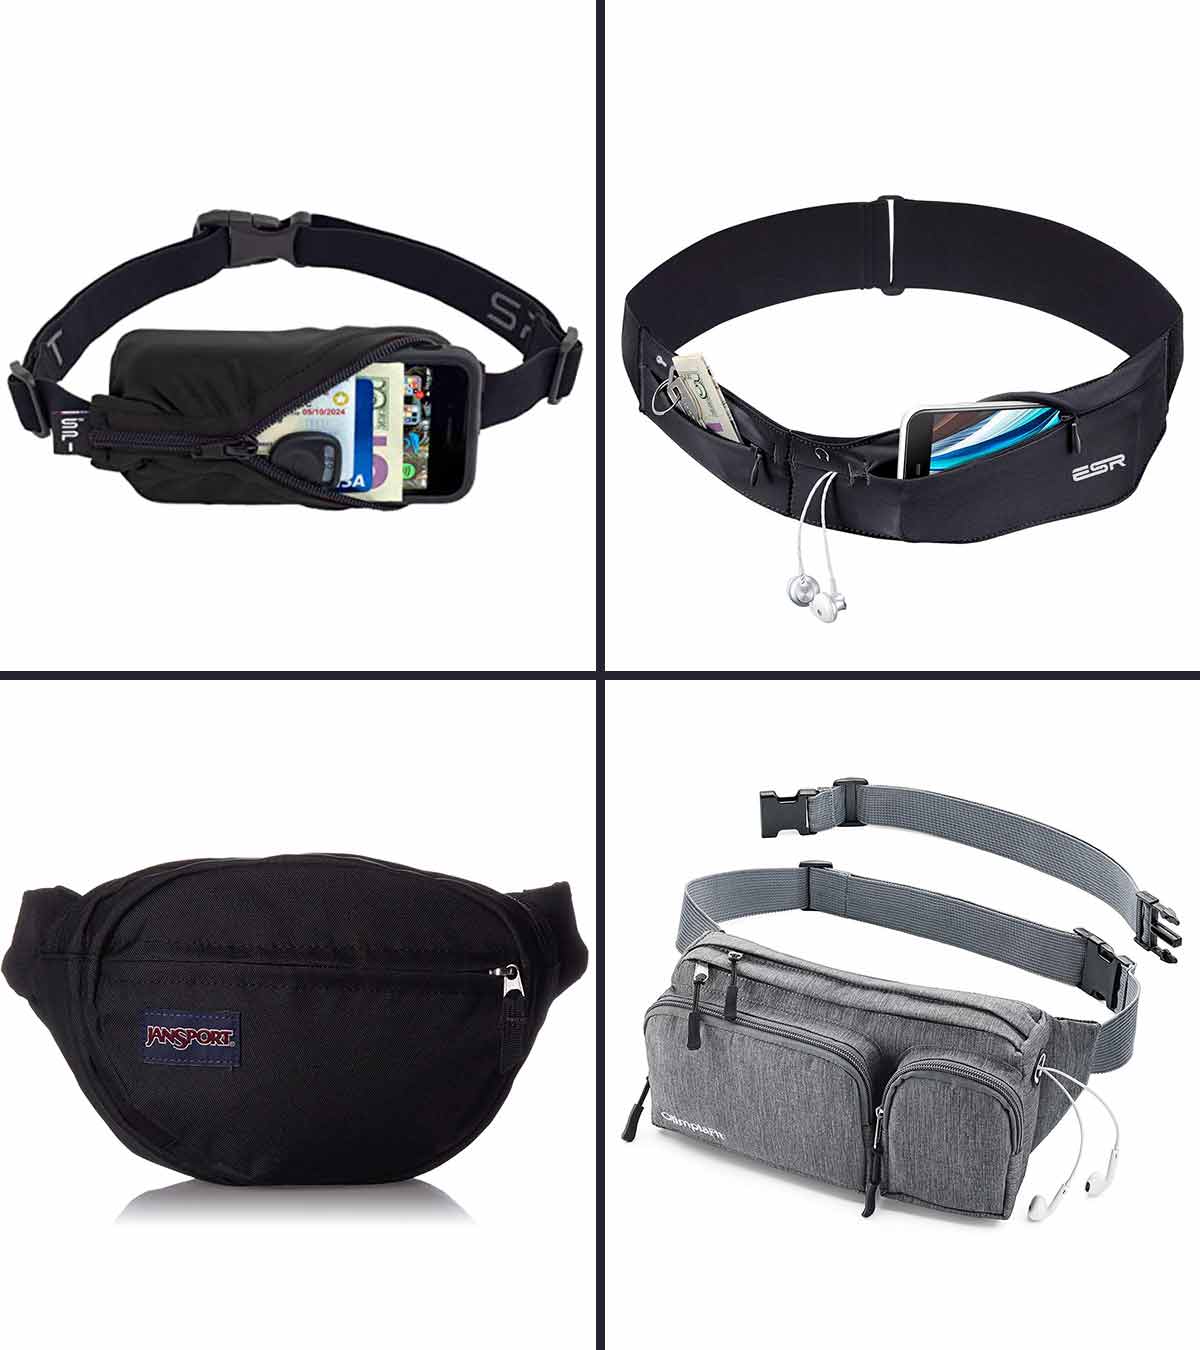 Black MoGist Waist Bag Pack Slim Waterproof Fanny Pack Travel Bum Bag Running Belt with Headphone Hole for Traveling Cycling Hiking Camping 